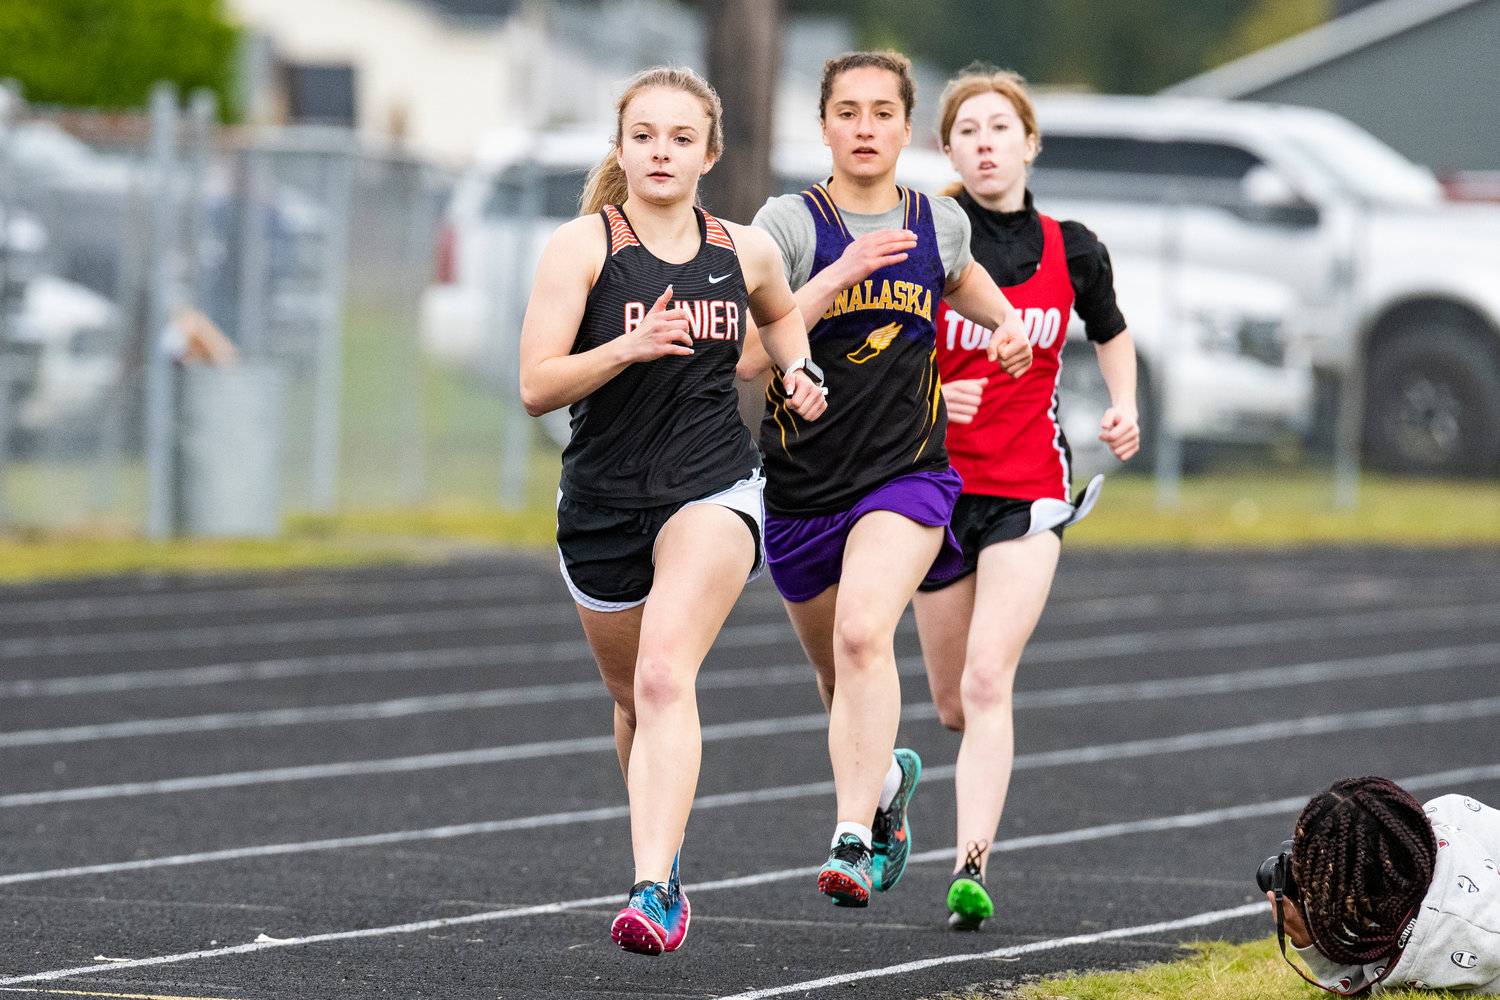 Rainier's Selena Niemi, Onalaska's Melissa Reiman and Toledo's Karley Harris compete in the 1600-meter run at the Central 2B League Championships on May 13.